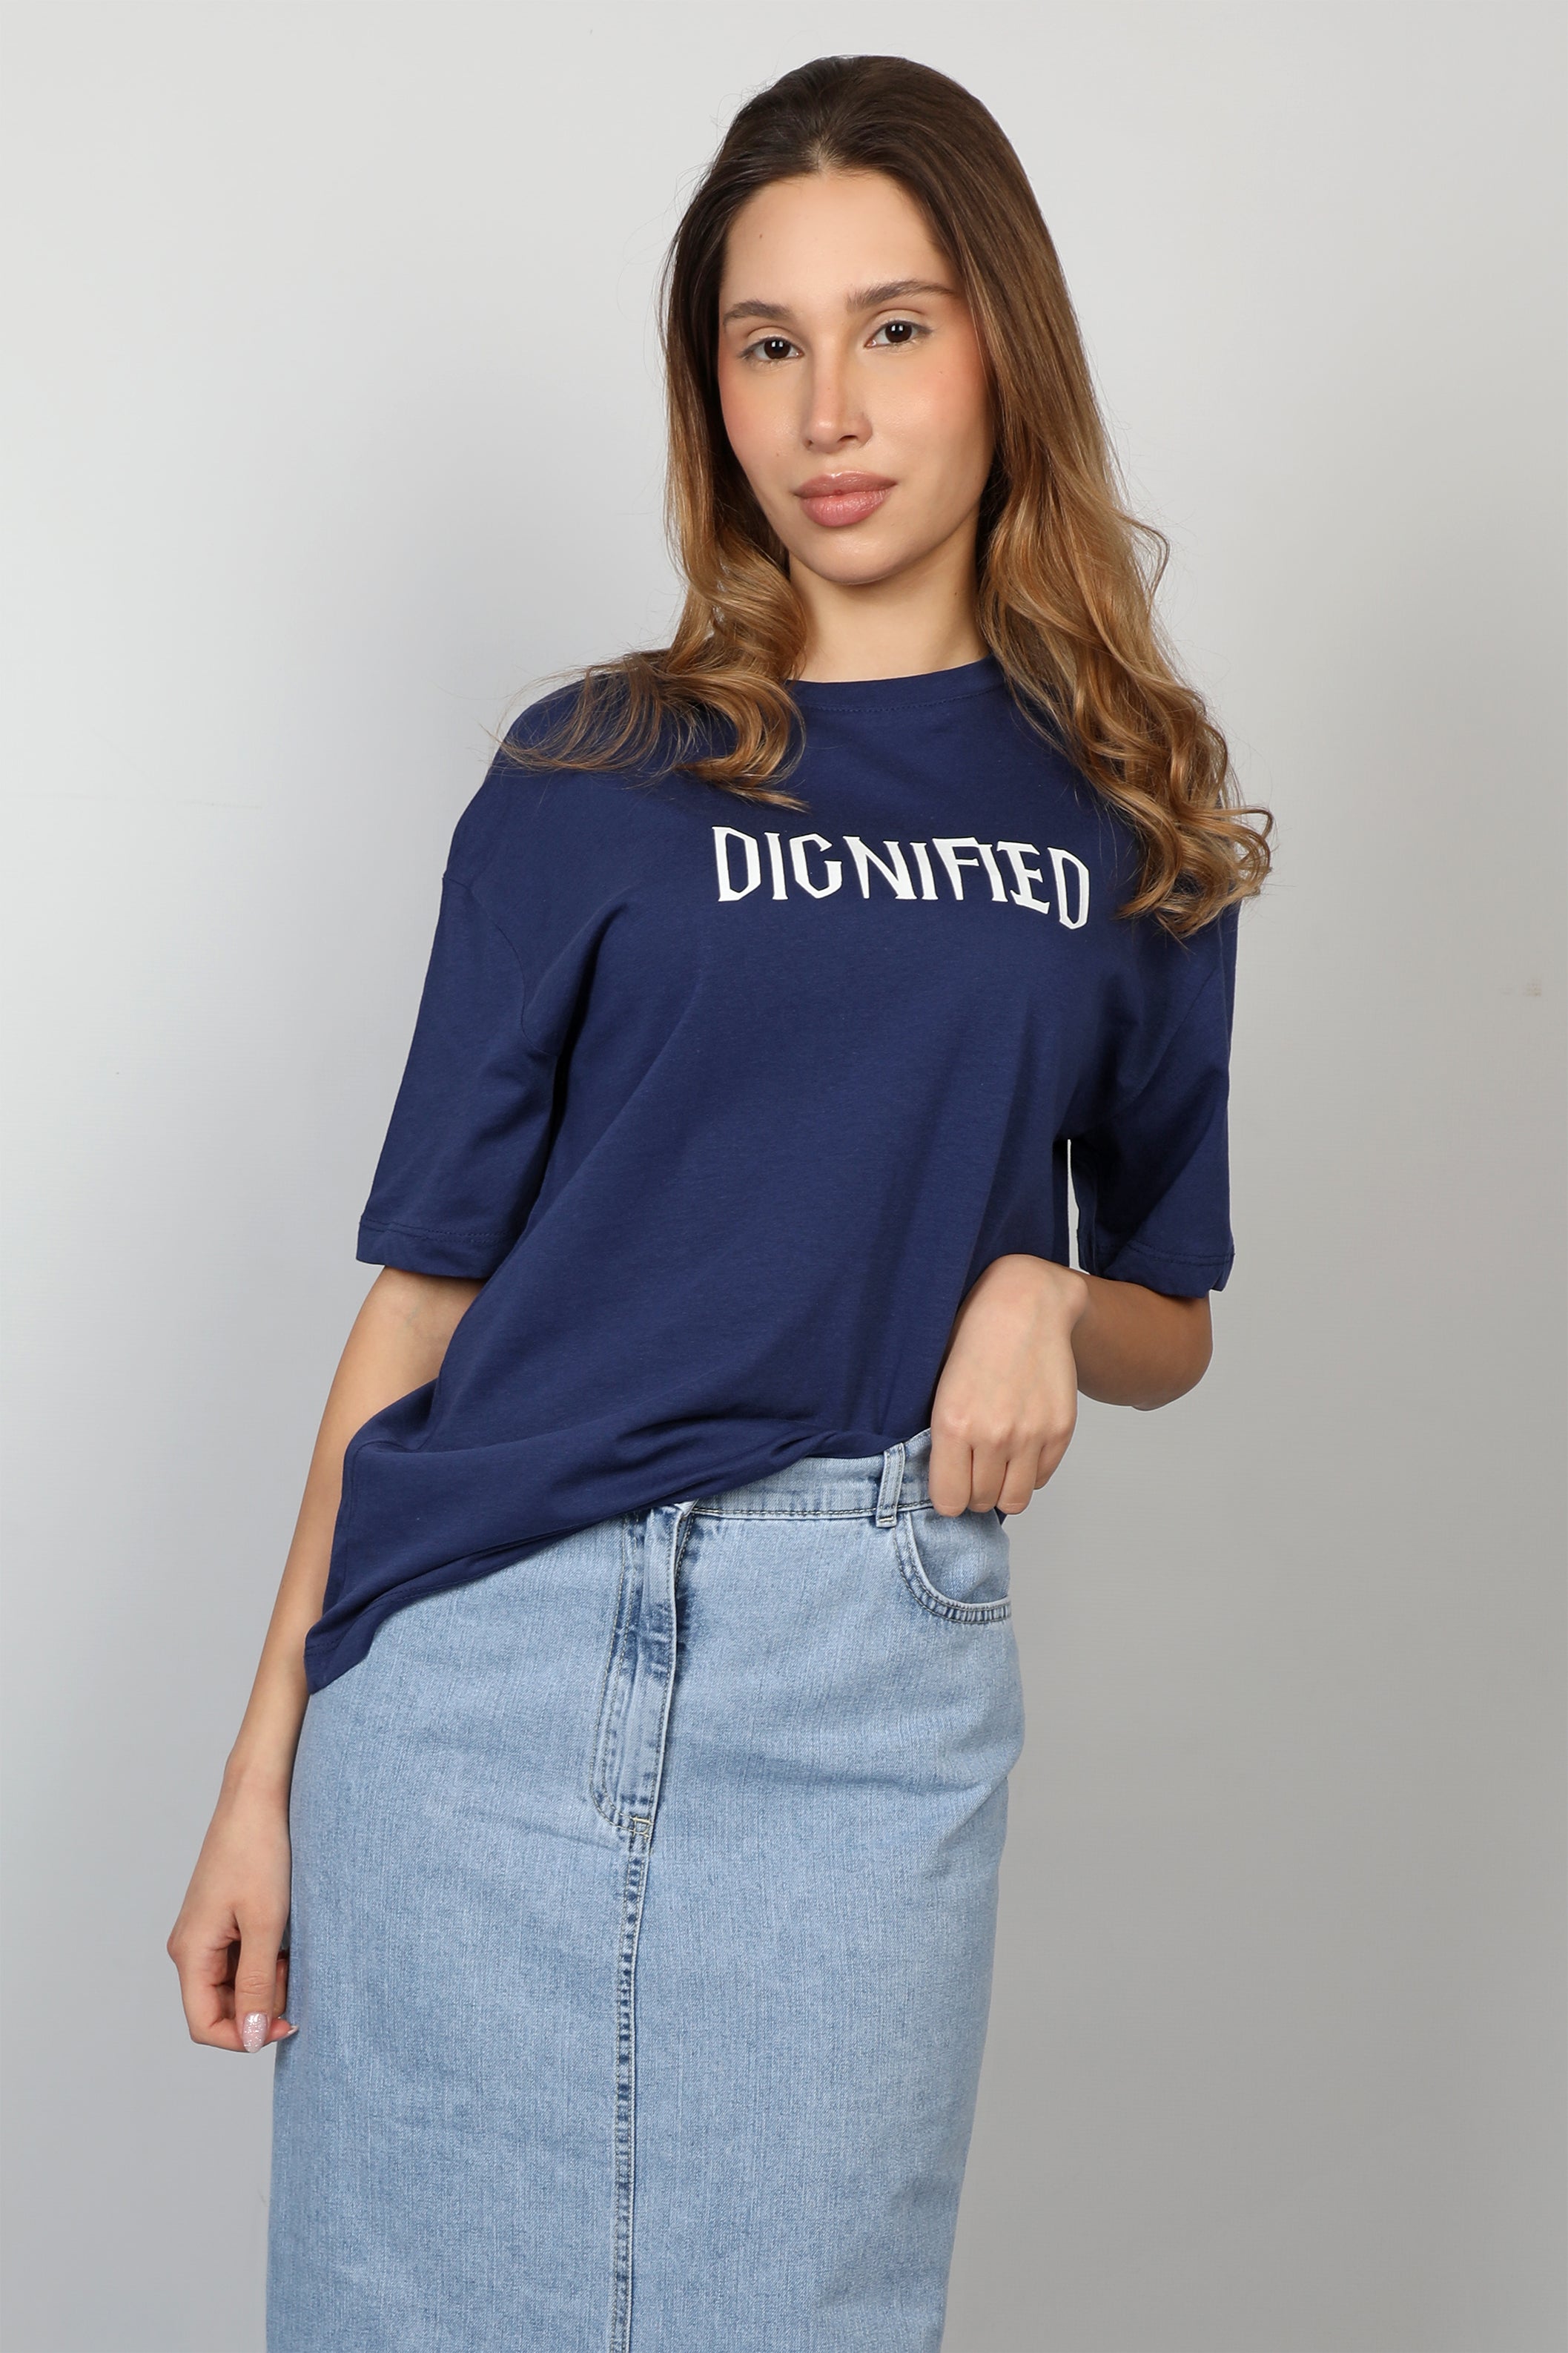 "DIGNIFIED" Printed Navy Oversized T-shirt